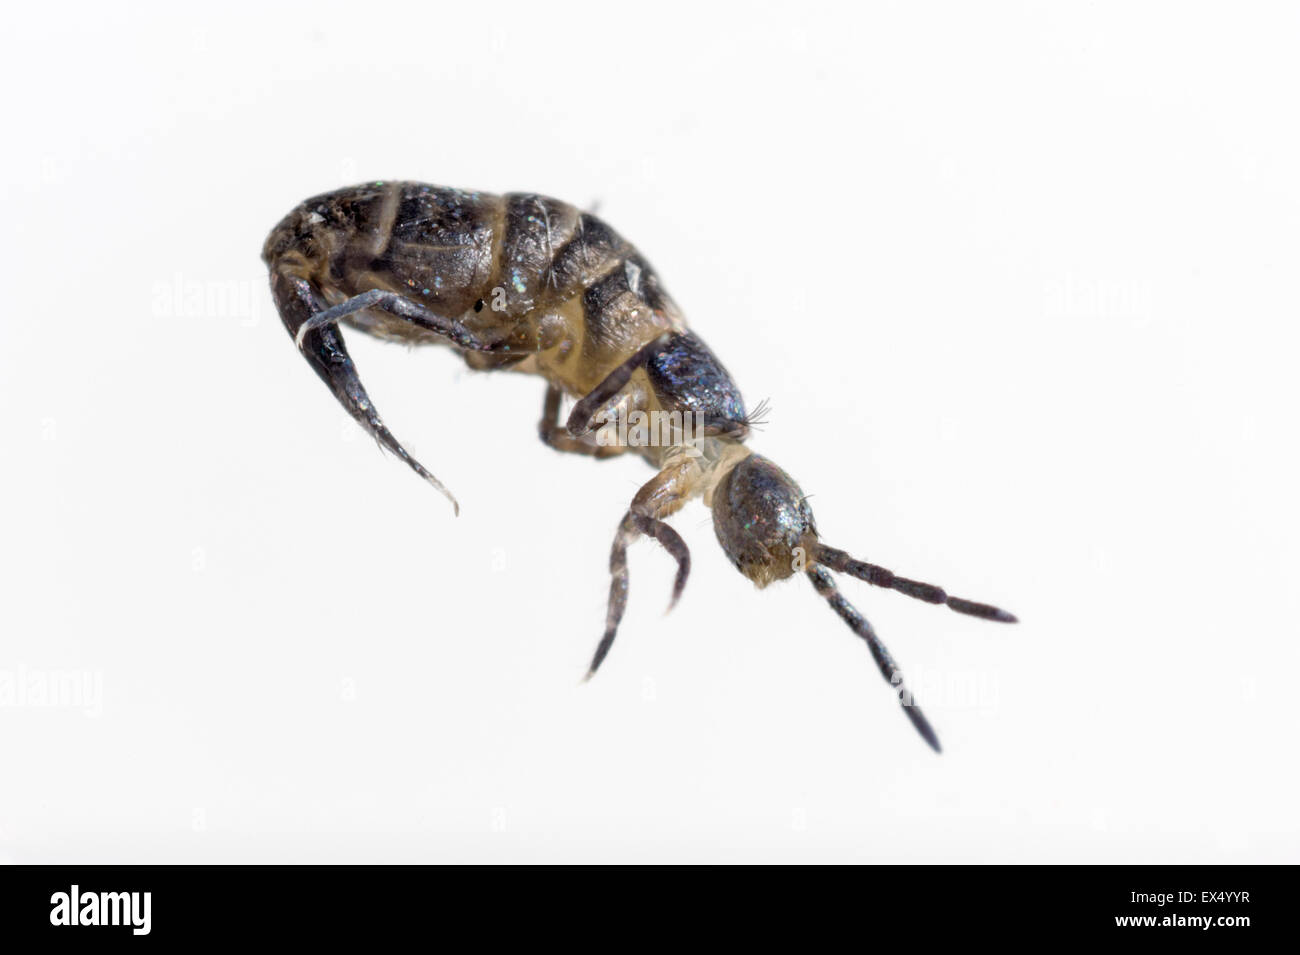 Close-up of a Springtail collected from leaf litter Stock Photo